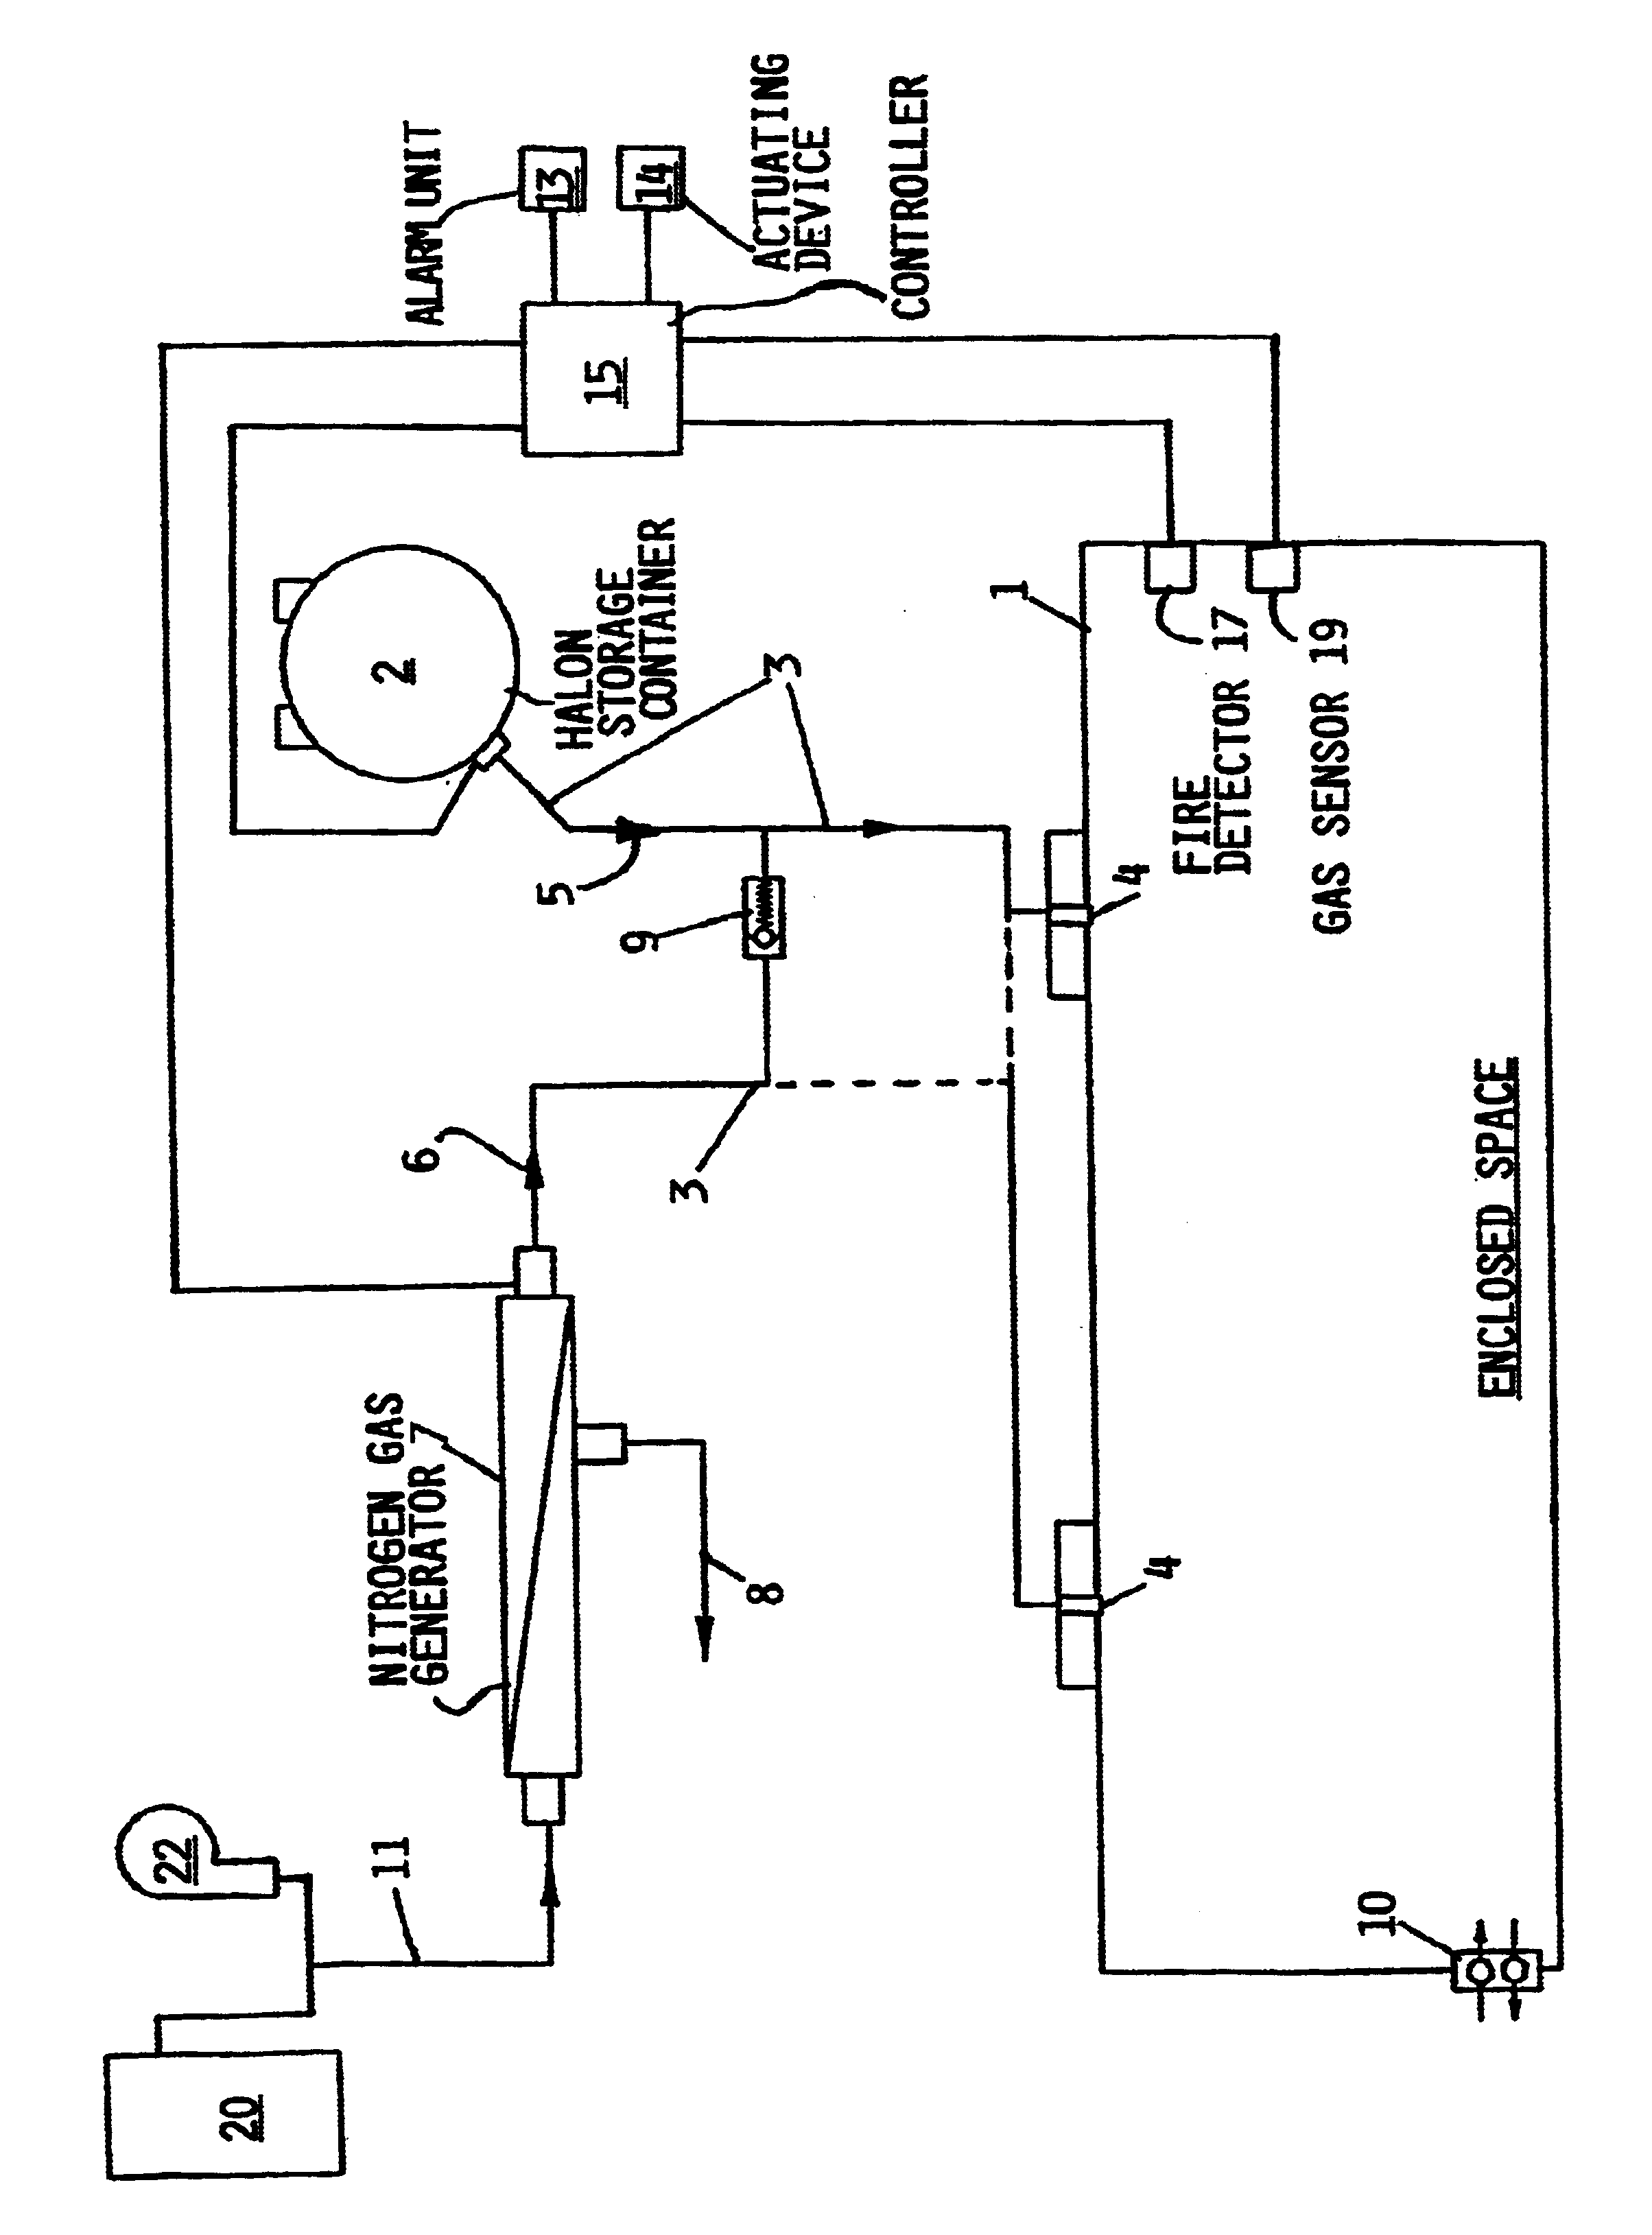 System for extinguishing and suppressing fire in an enclosed space in an aircraft